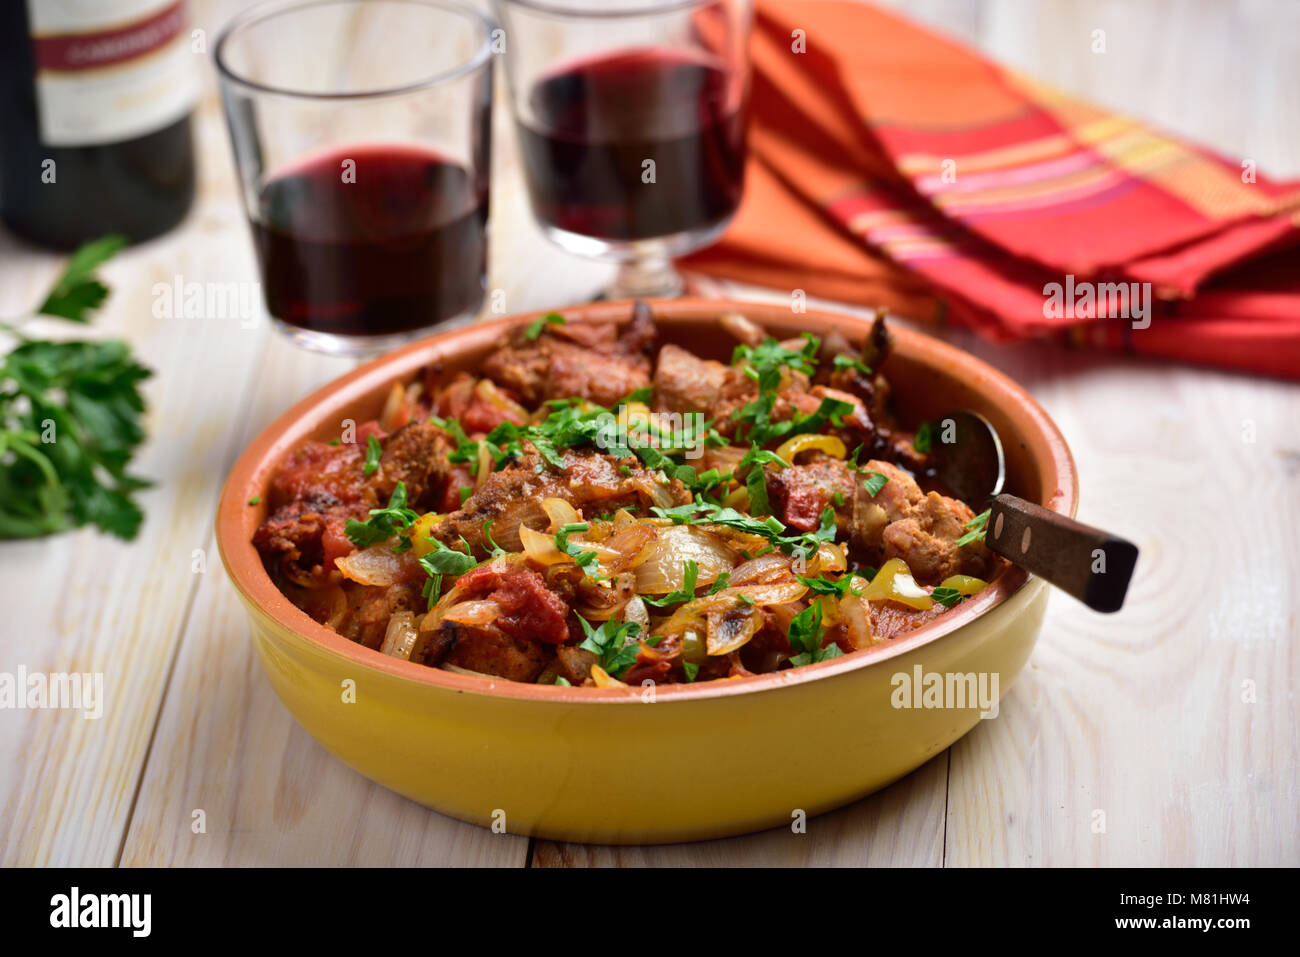 Rabbit stew a basque with onion, pepper, and parsley Stock Photo